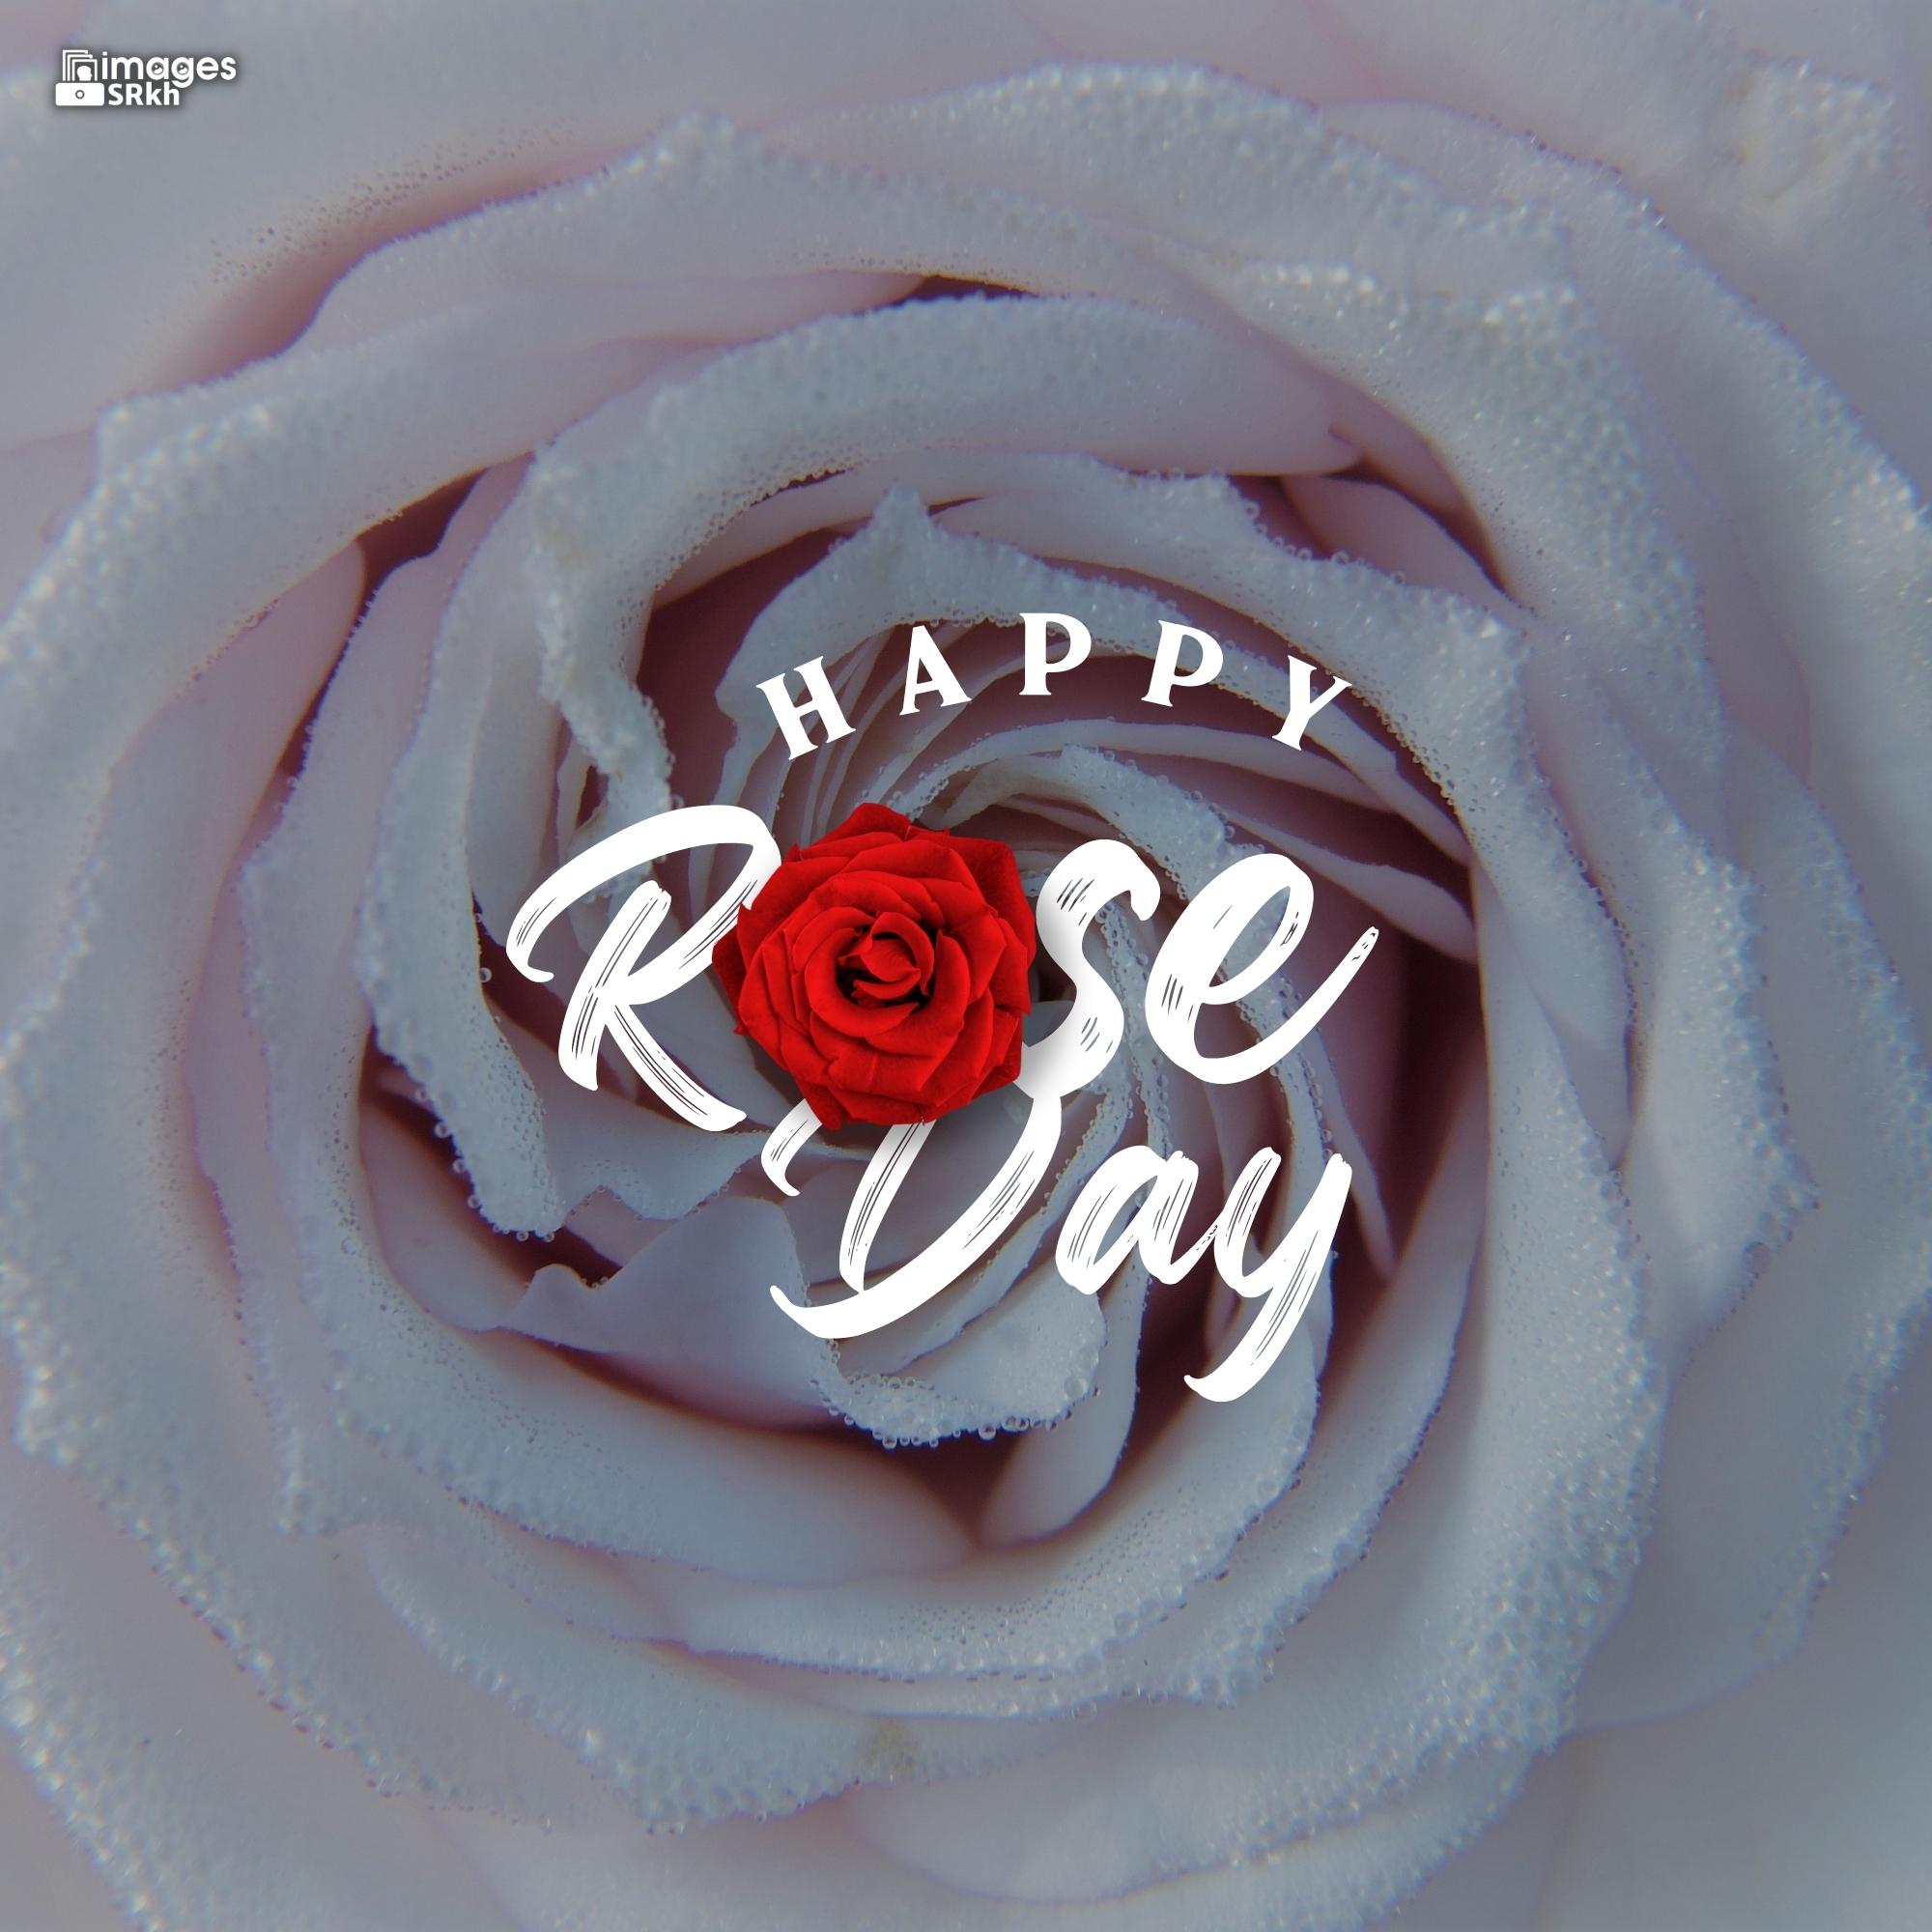 Happy Rose Day Image Hd Download (6)